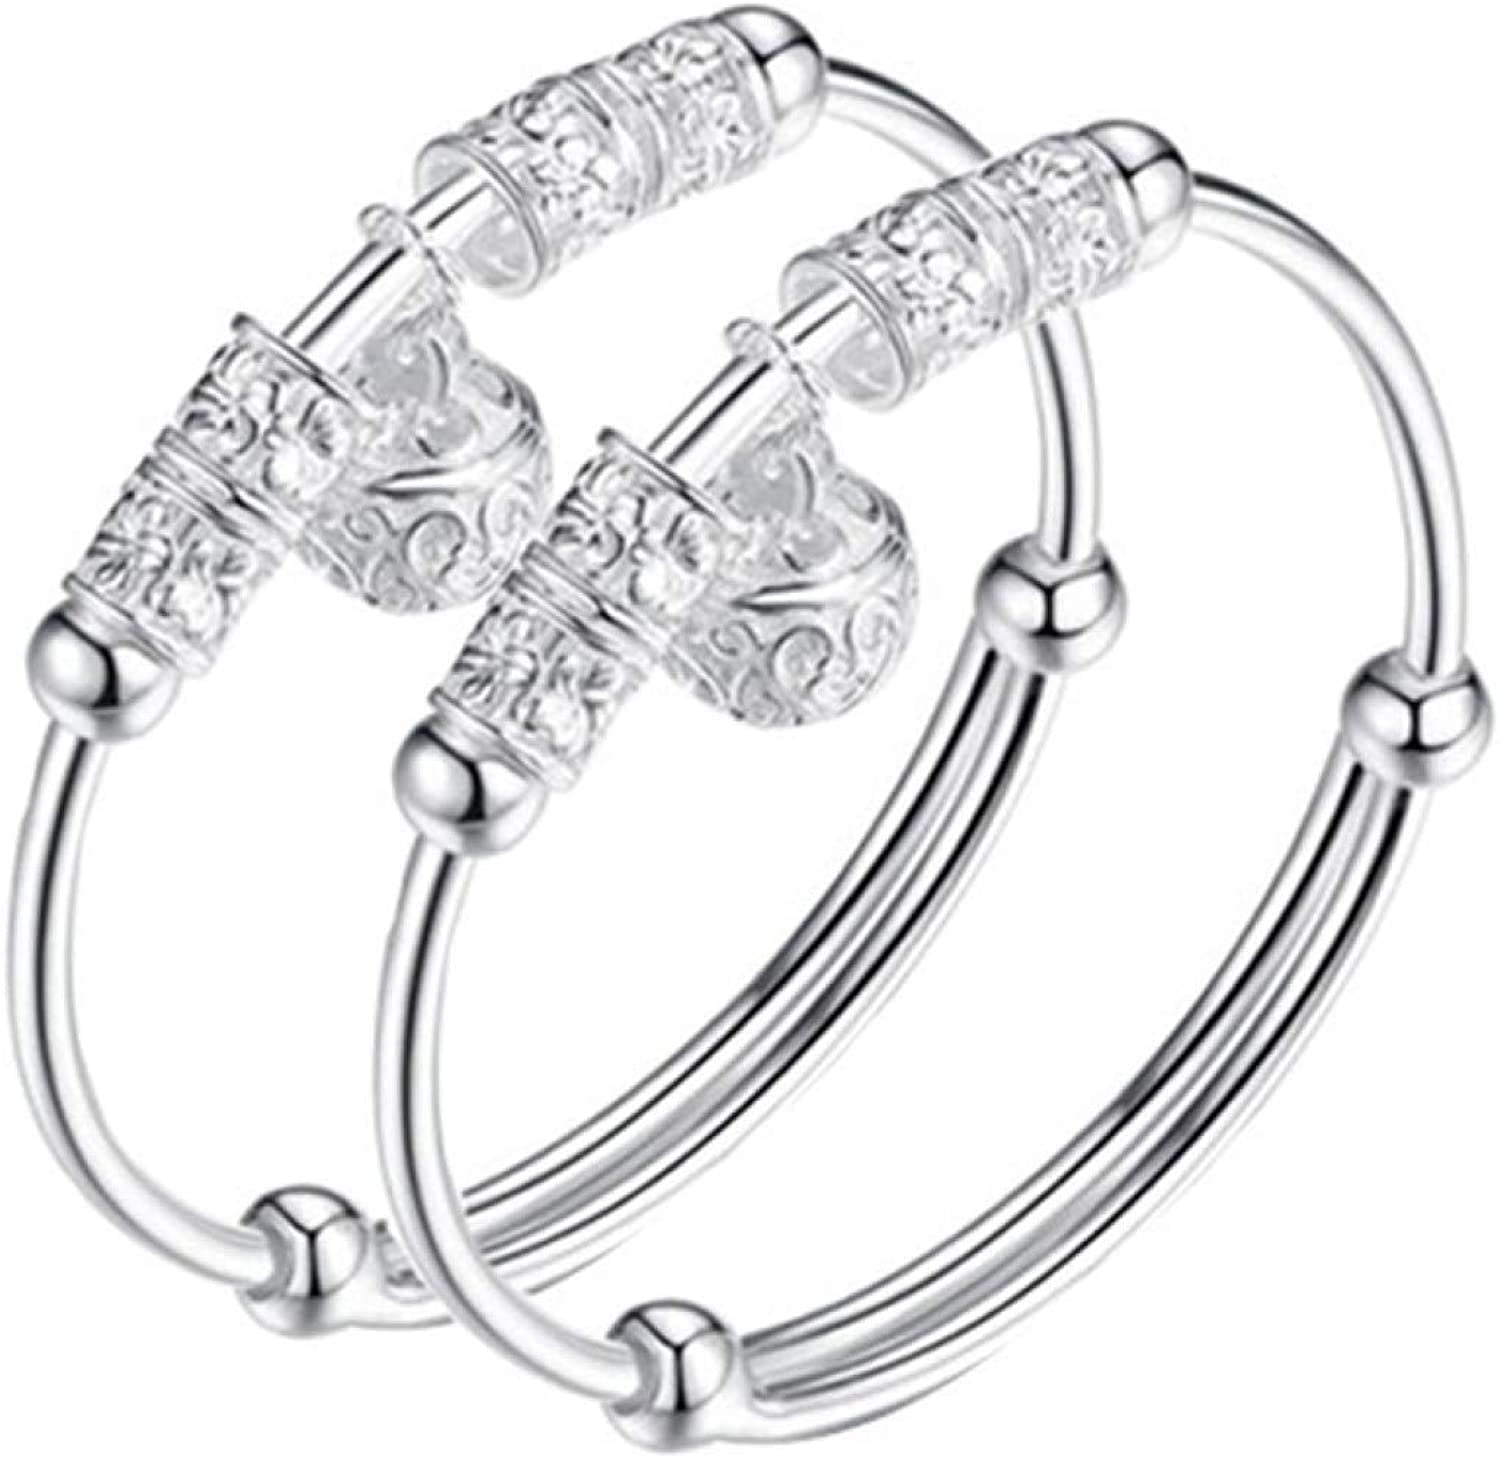 Details about   1Pair Silver Newborn Baby Bell Bangle Bracelet Health Somebody Loves CarvedDCP 